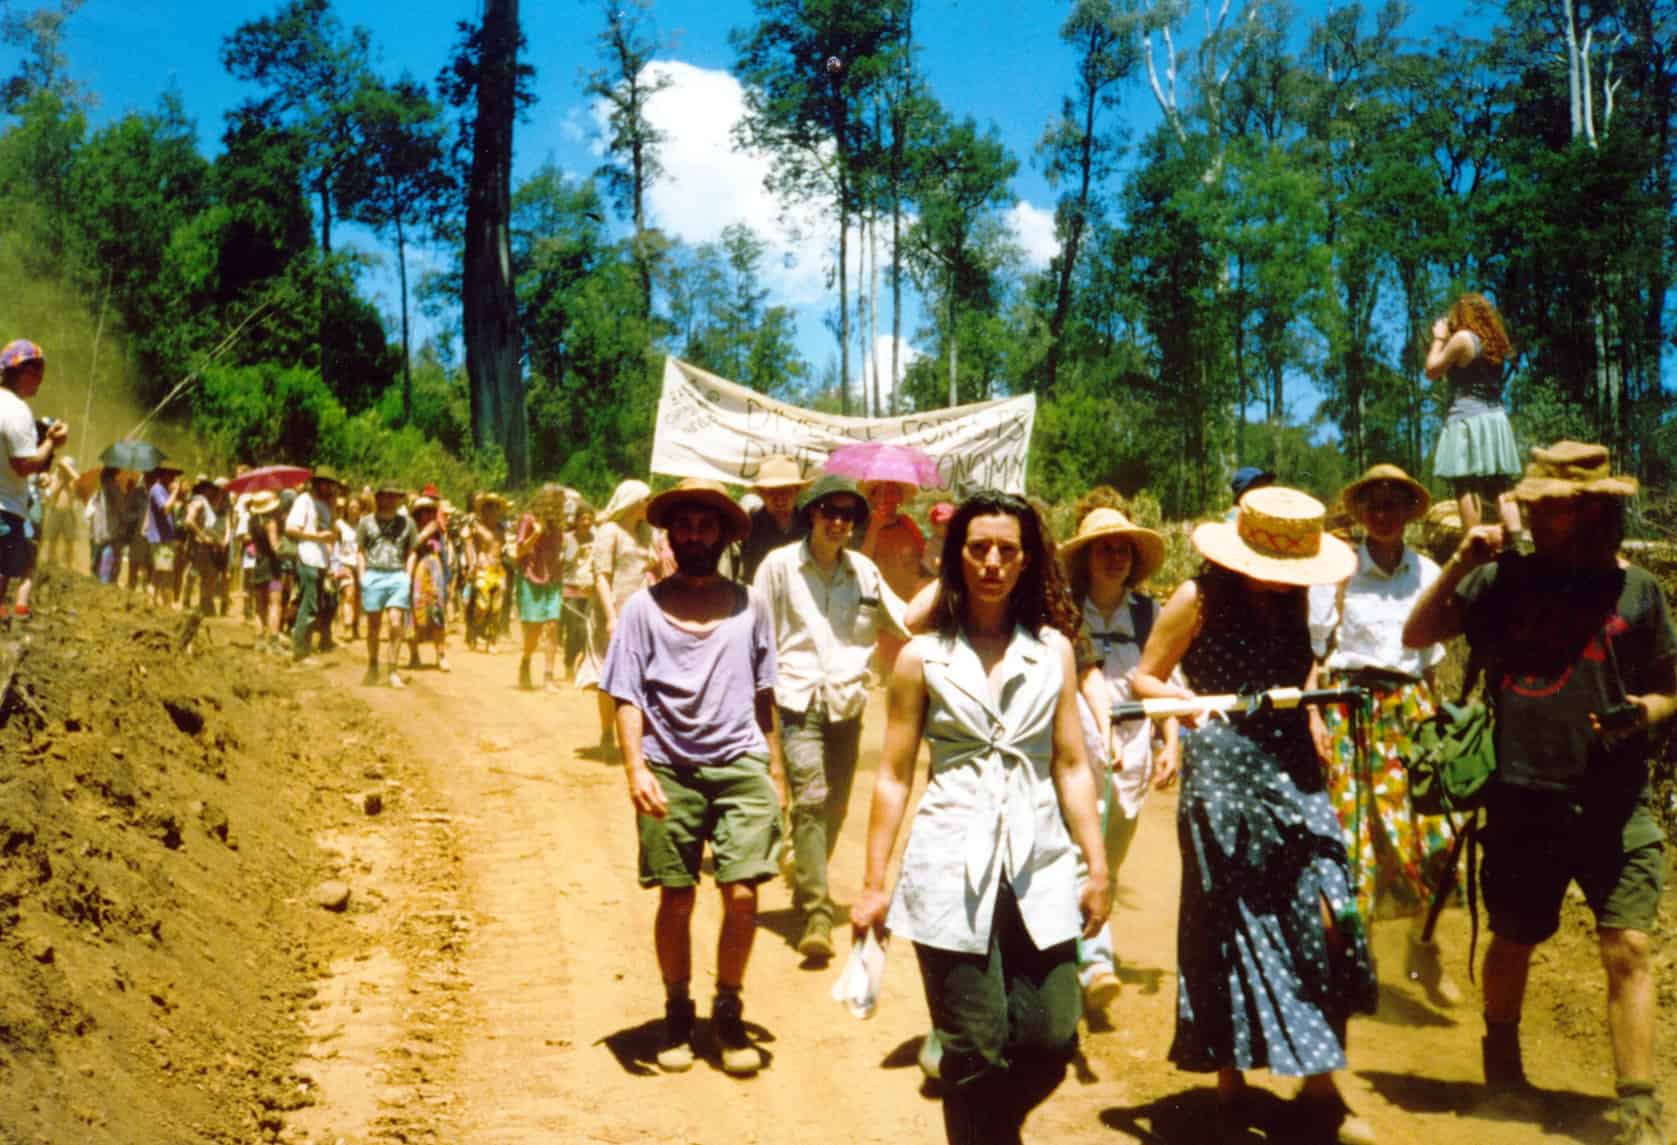 A group of protestors walking down a dirt road. One group is holding a banner that says Diverse Forests.